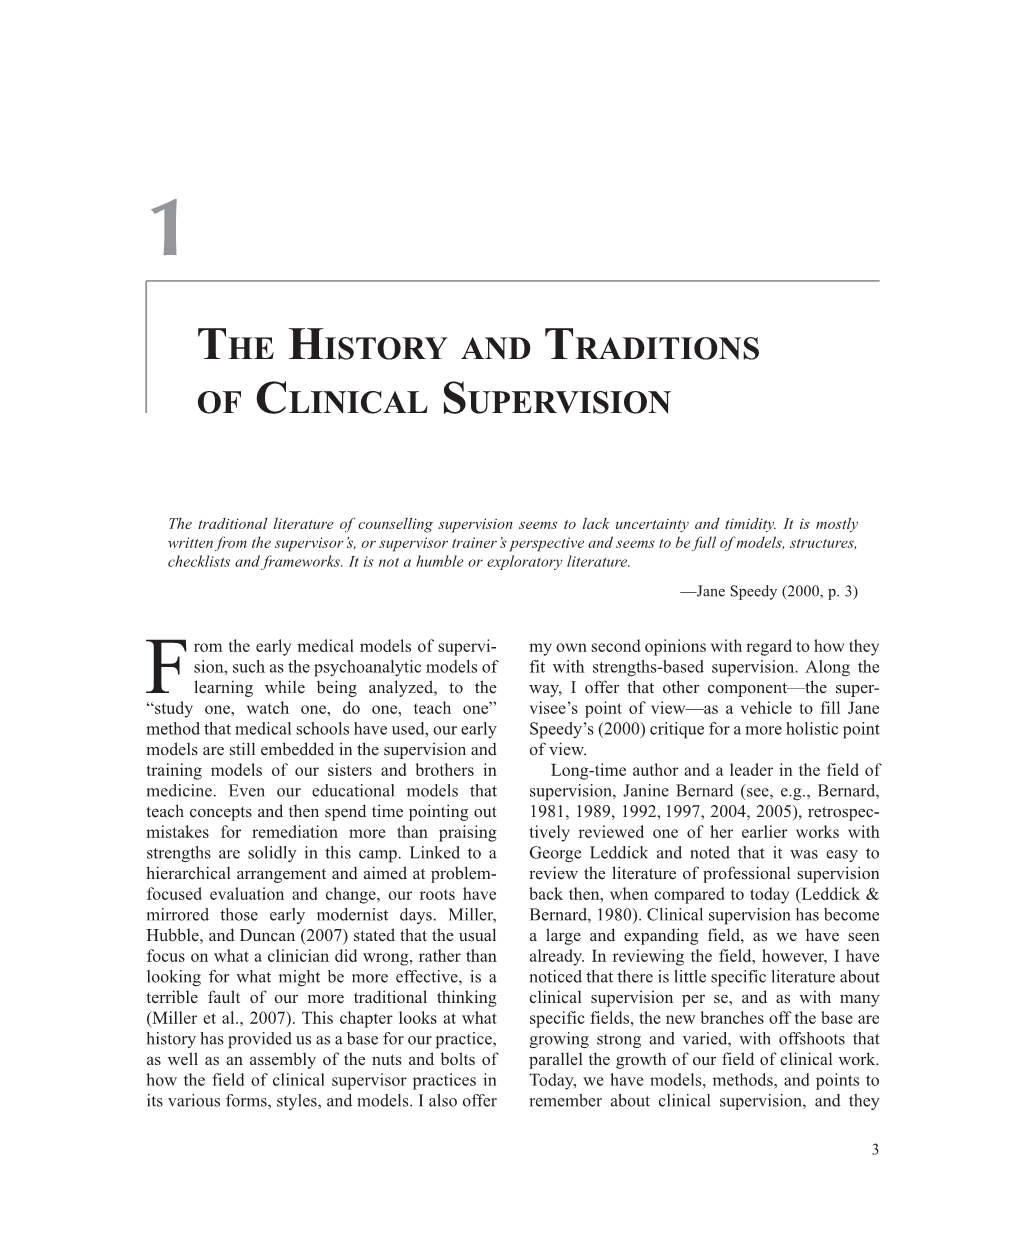 The History and Traditions of Clinical Supervision